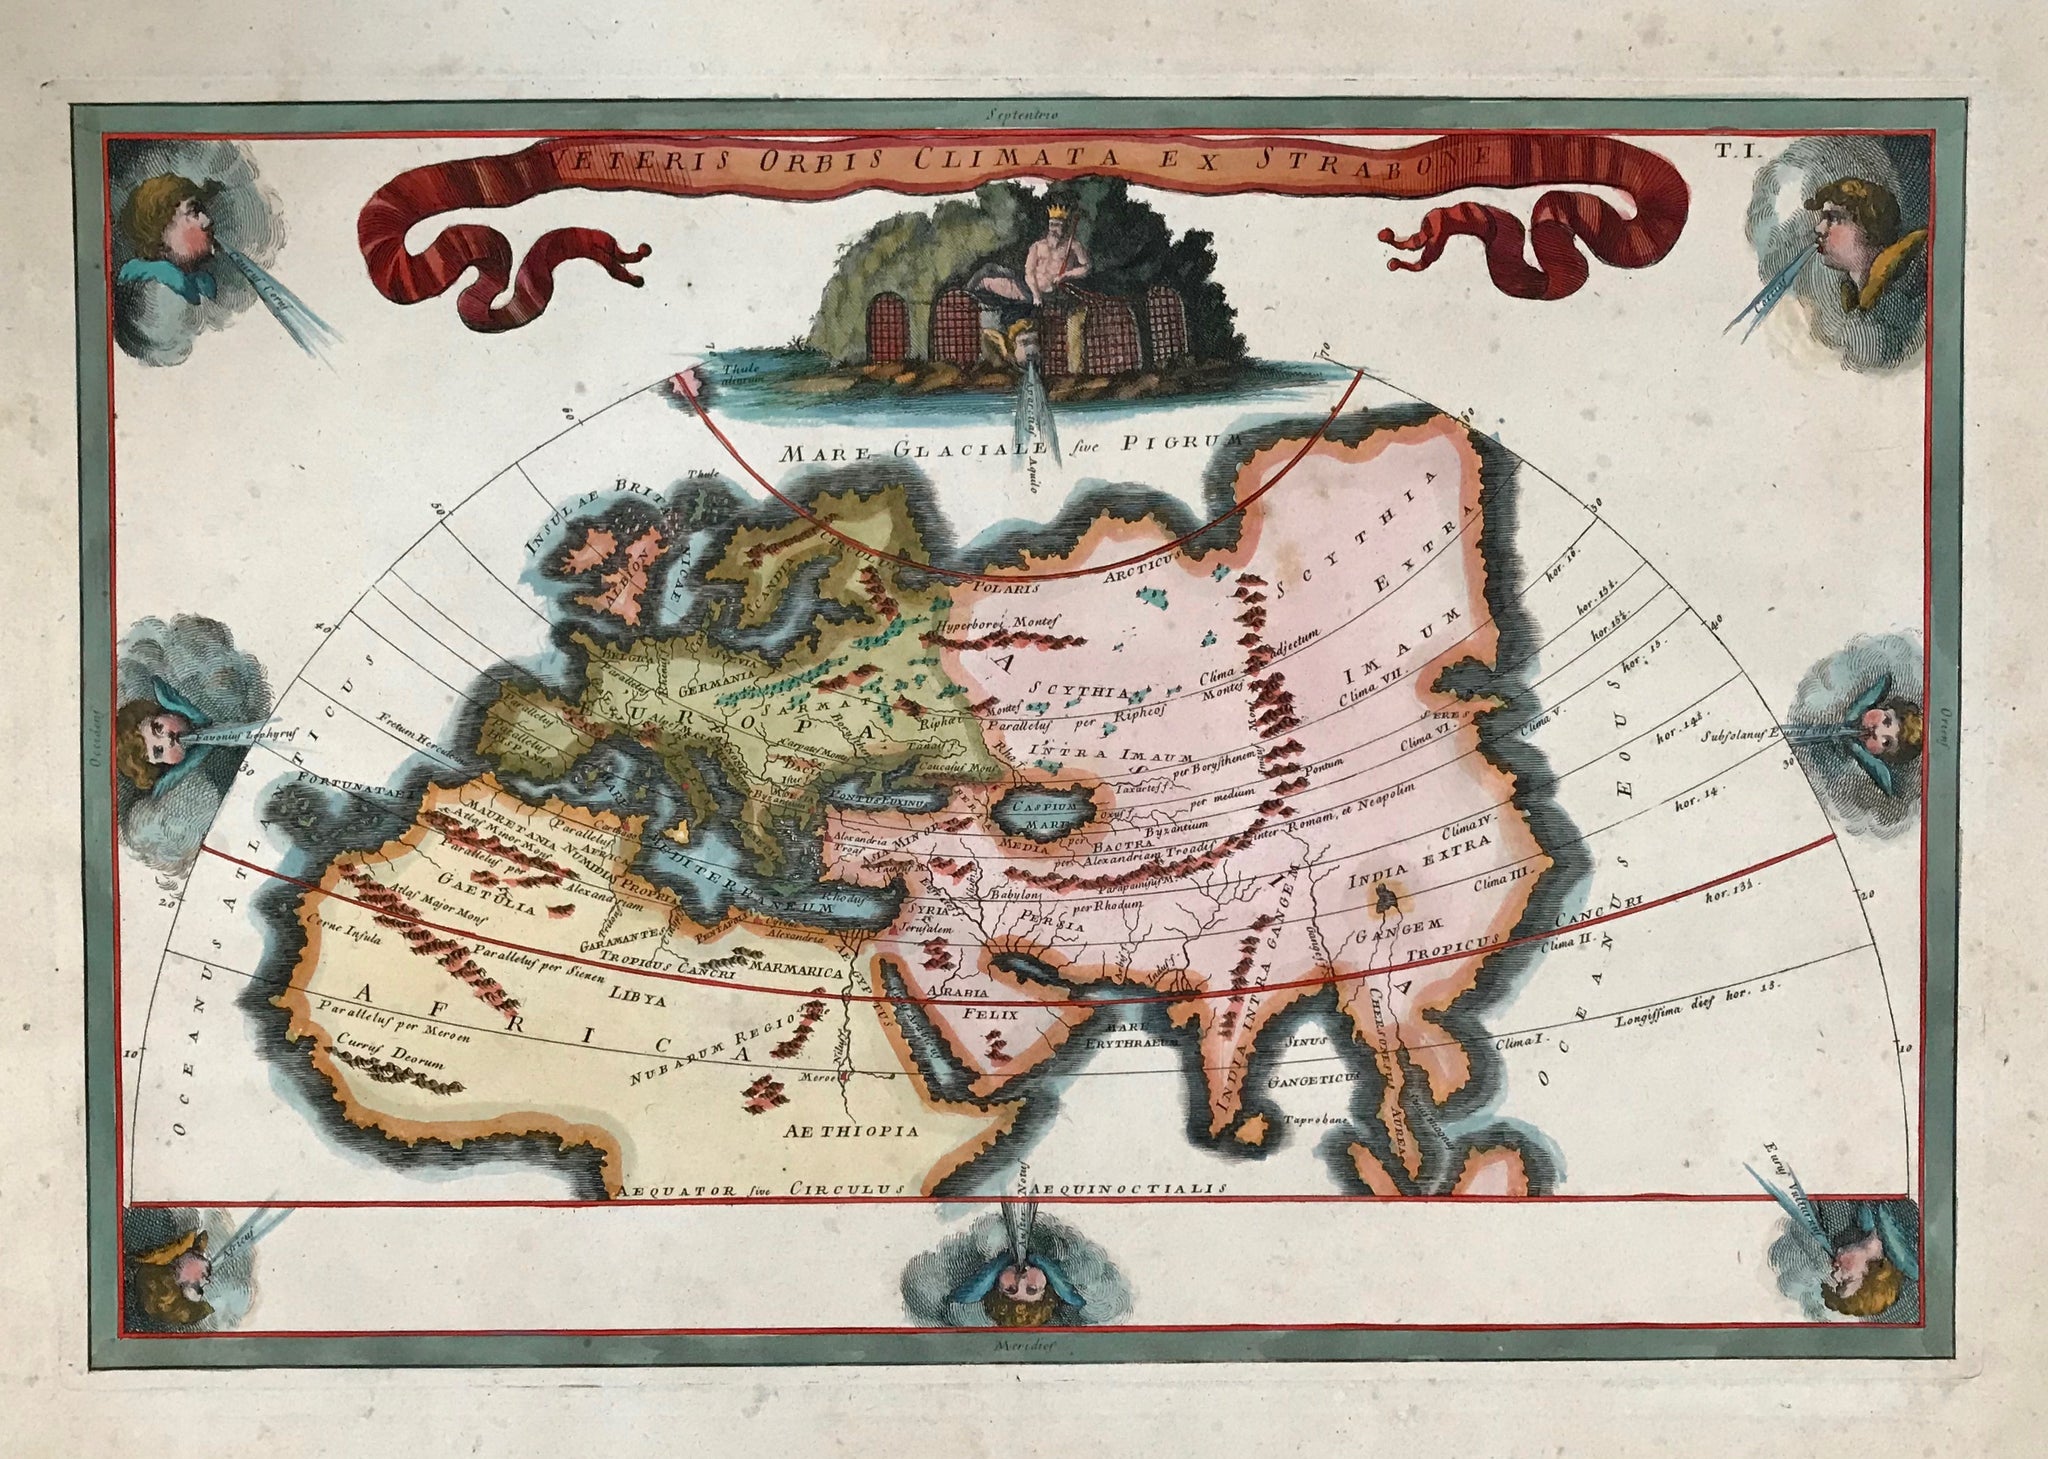 "Veteris Orbis Climata ex Strabone". Copper etching of a Ptolemaic map initiated by Strabo and most likely published by Christopher Cellarius (1638 - 1707). Ca.1700.  The map, decoratad with a ribbon title and eight winds blowing from all directions, shows the "Old World" in which Strabo defined his assumptions of climatic regions on earth